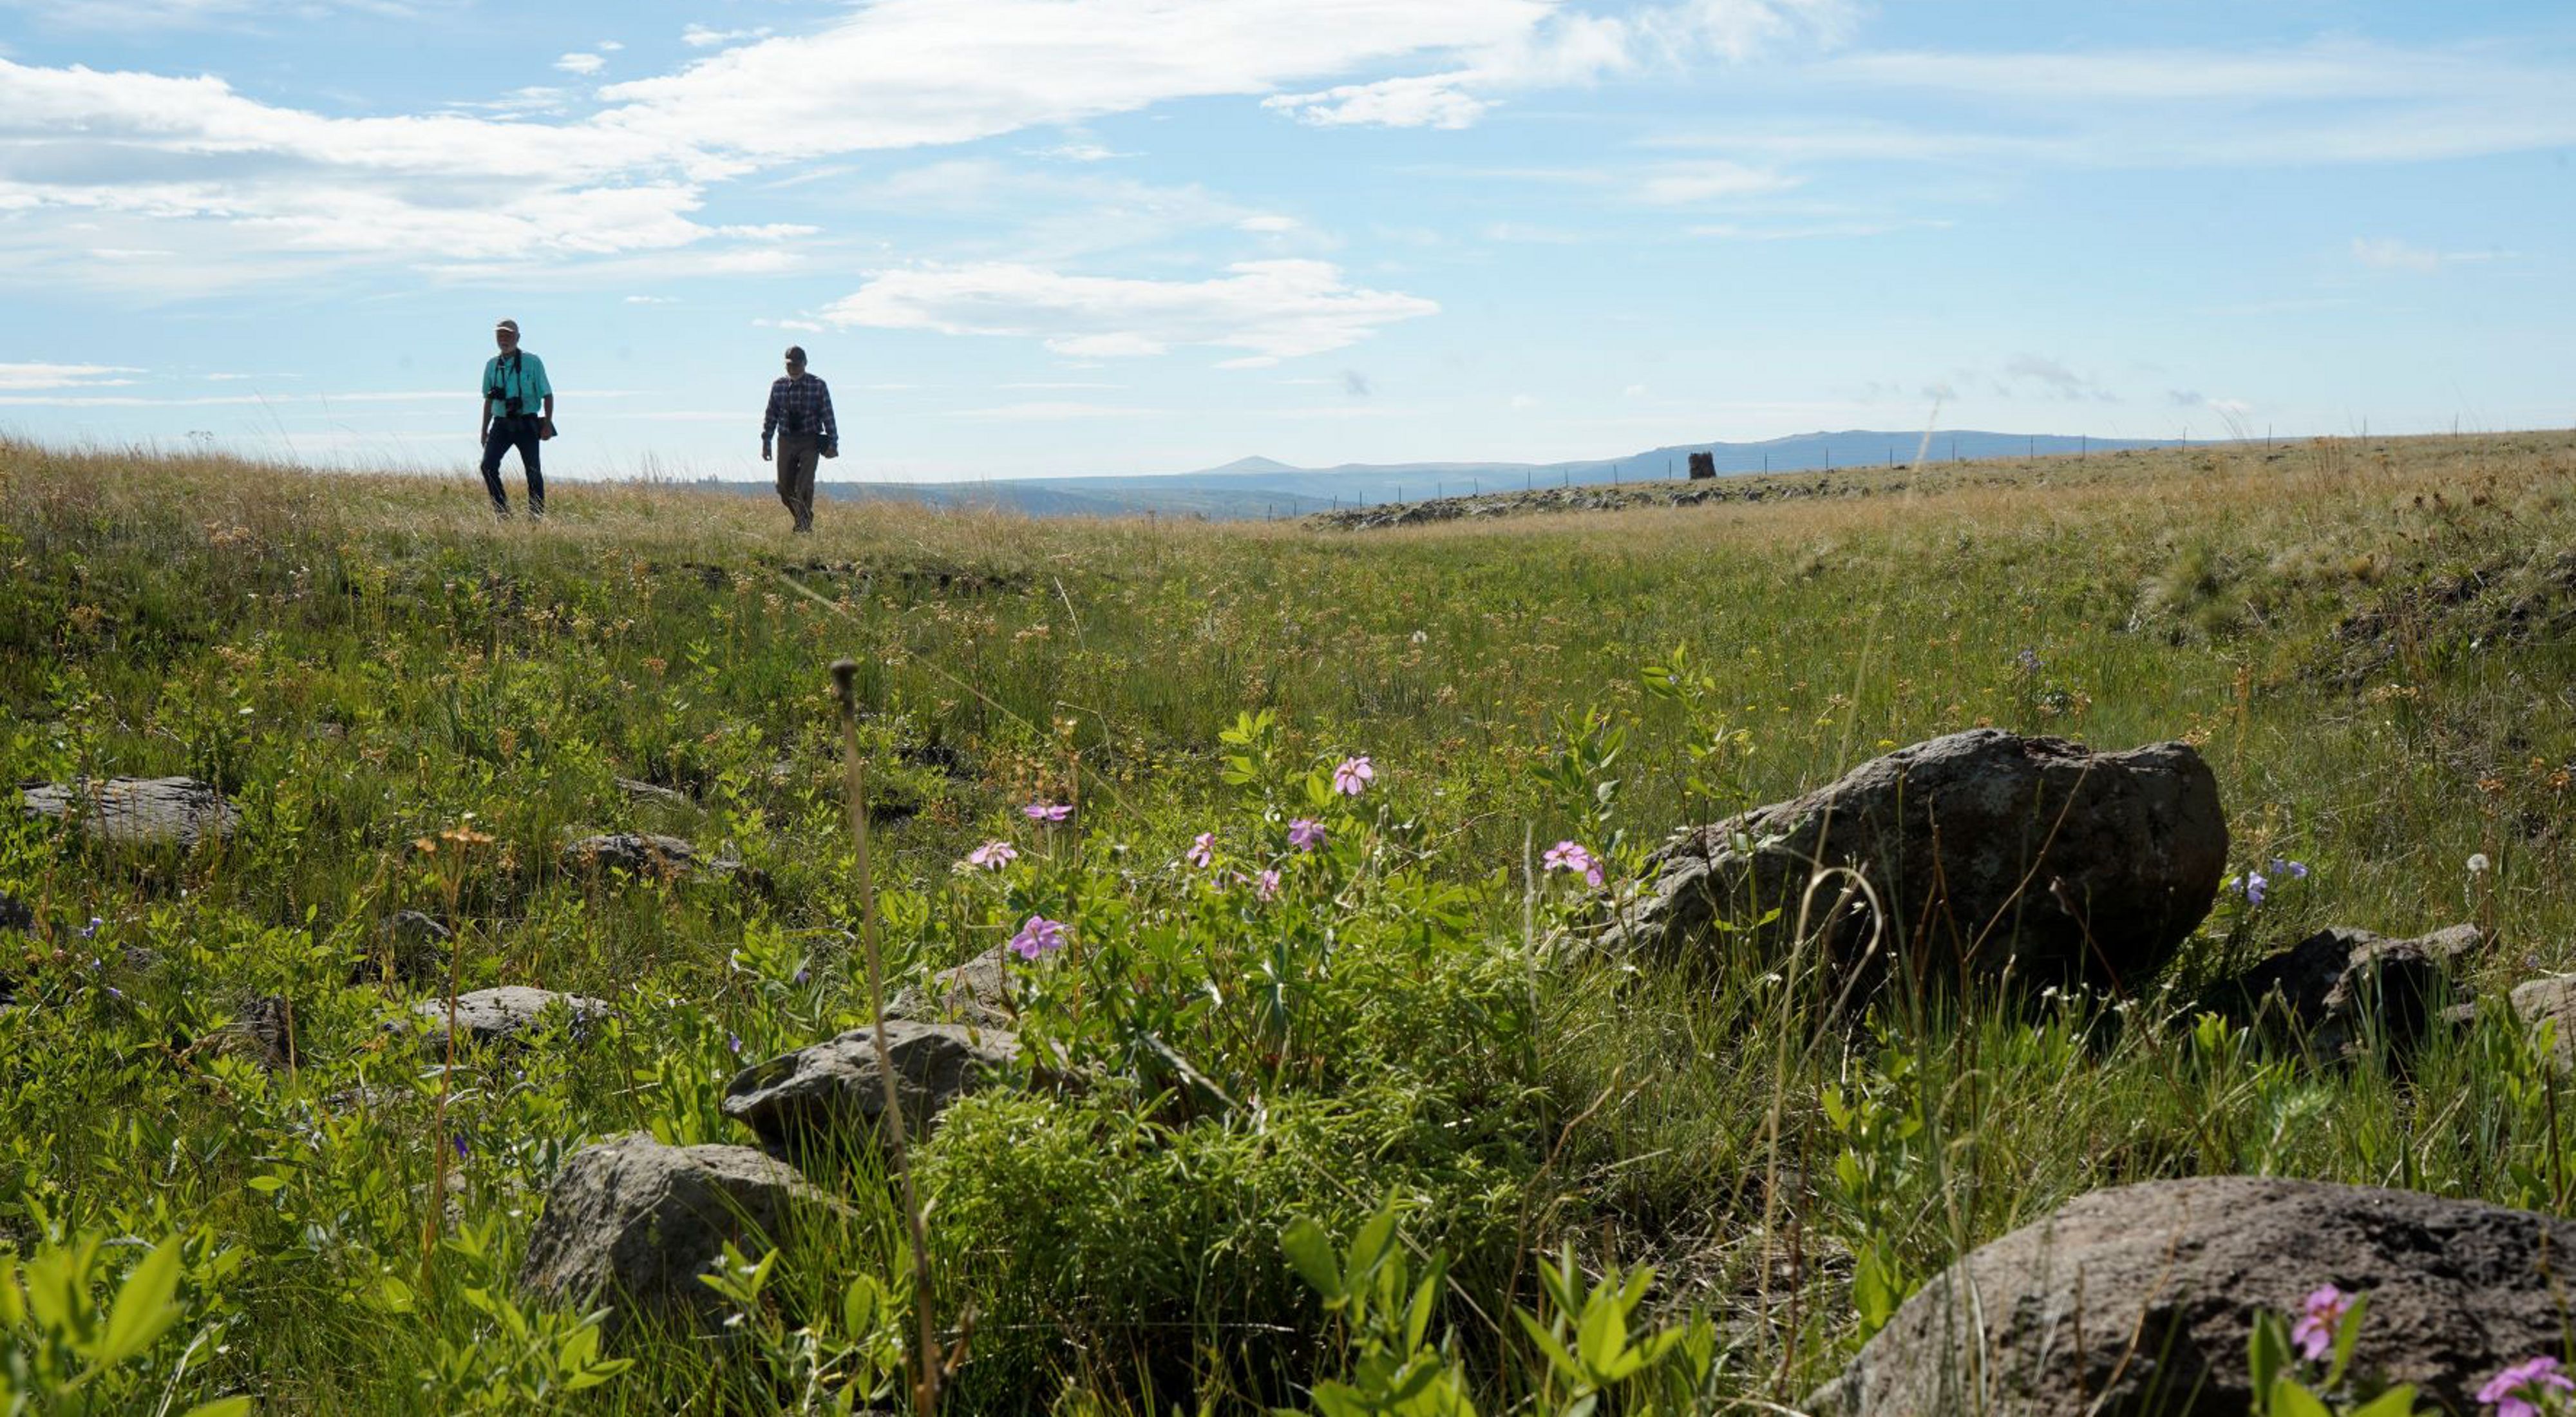 People walking into the distance on grasslands with blue skies.